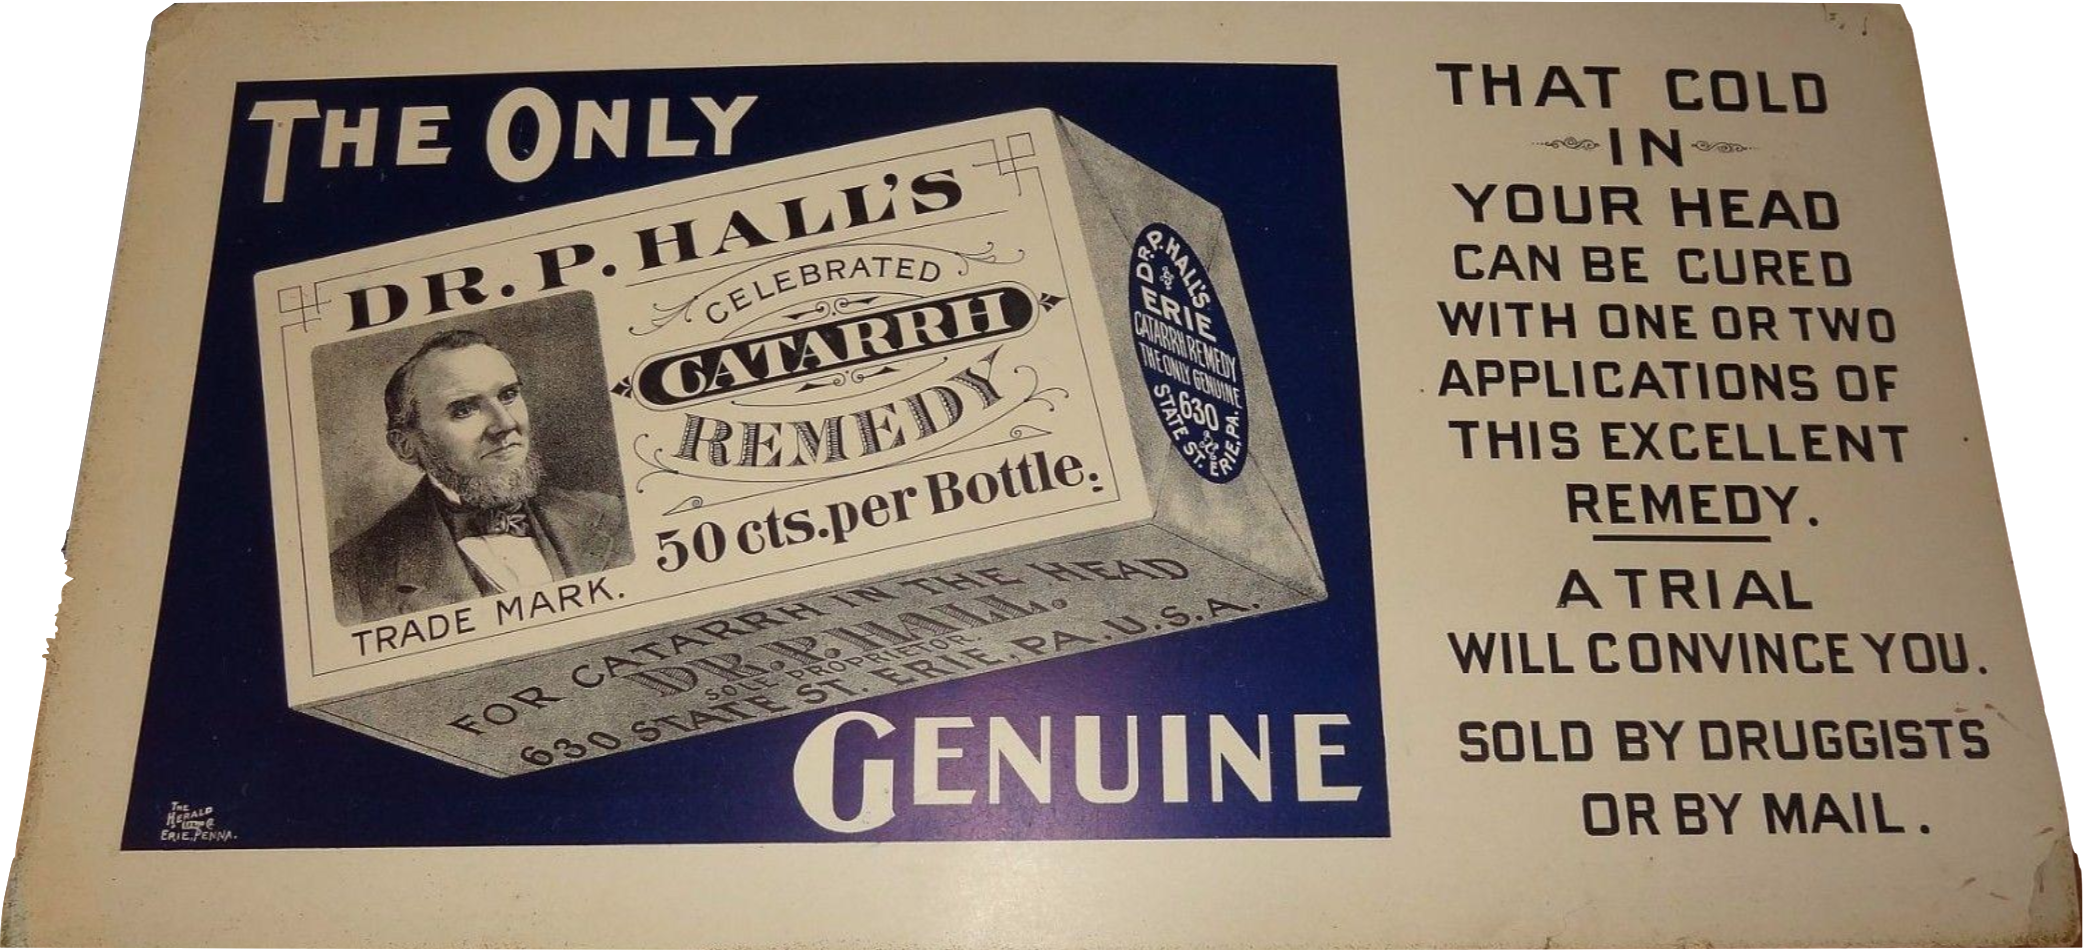 2. Advertisement for Dr. P. Halls Celebrated Catarrh Remedy